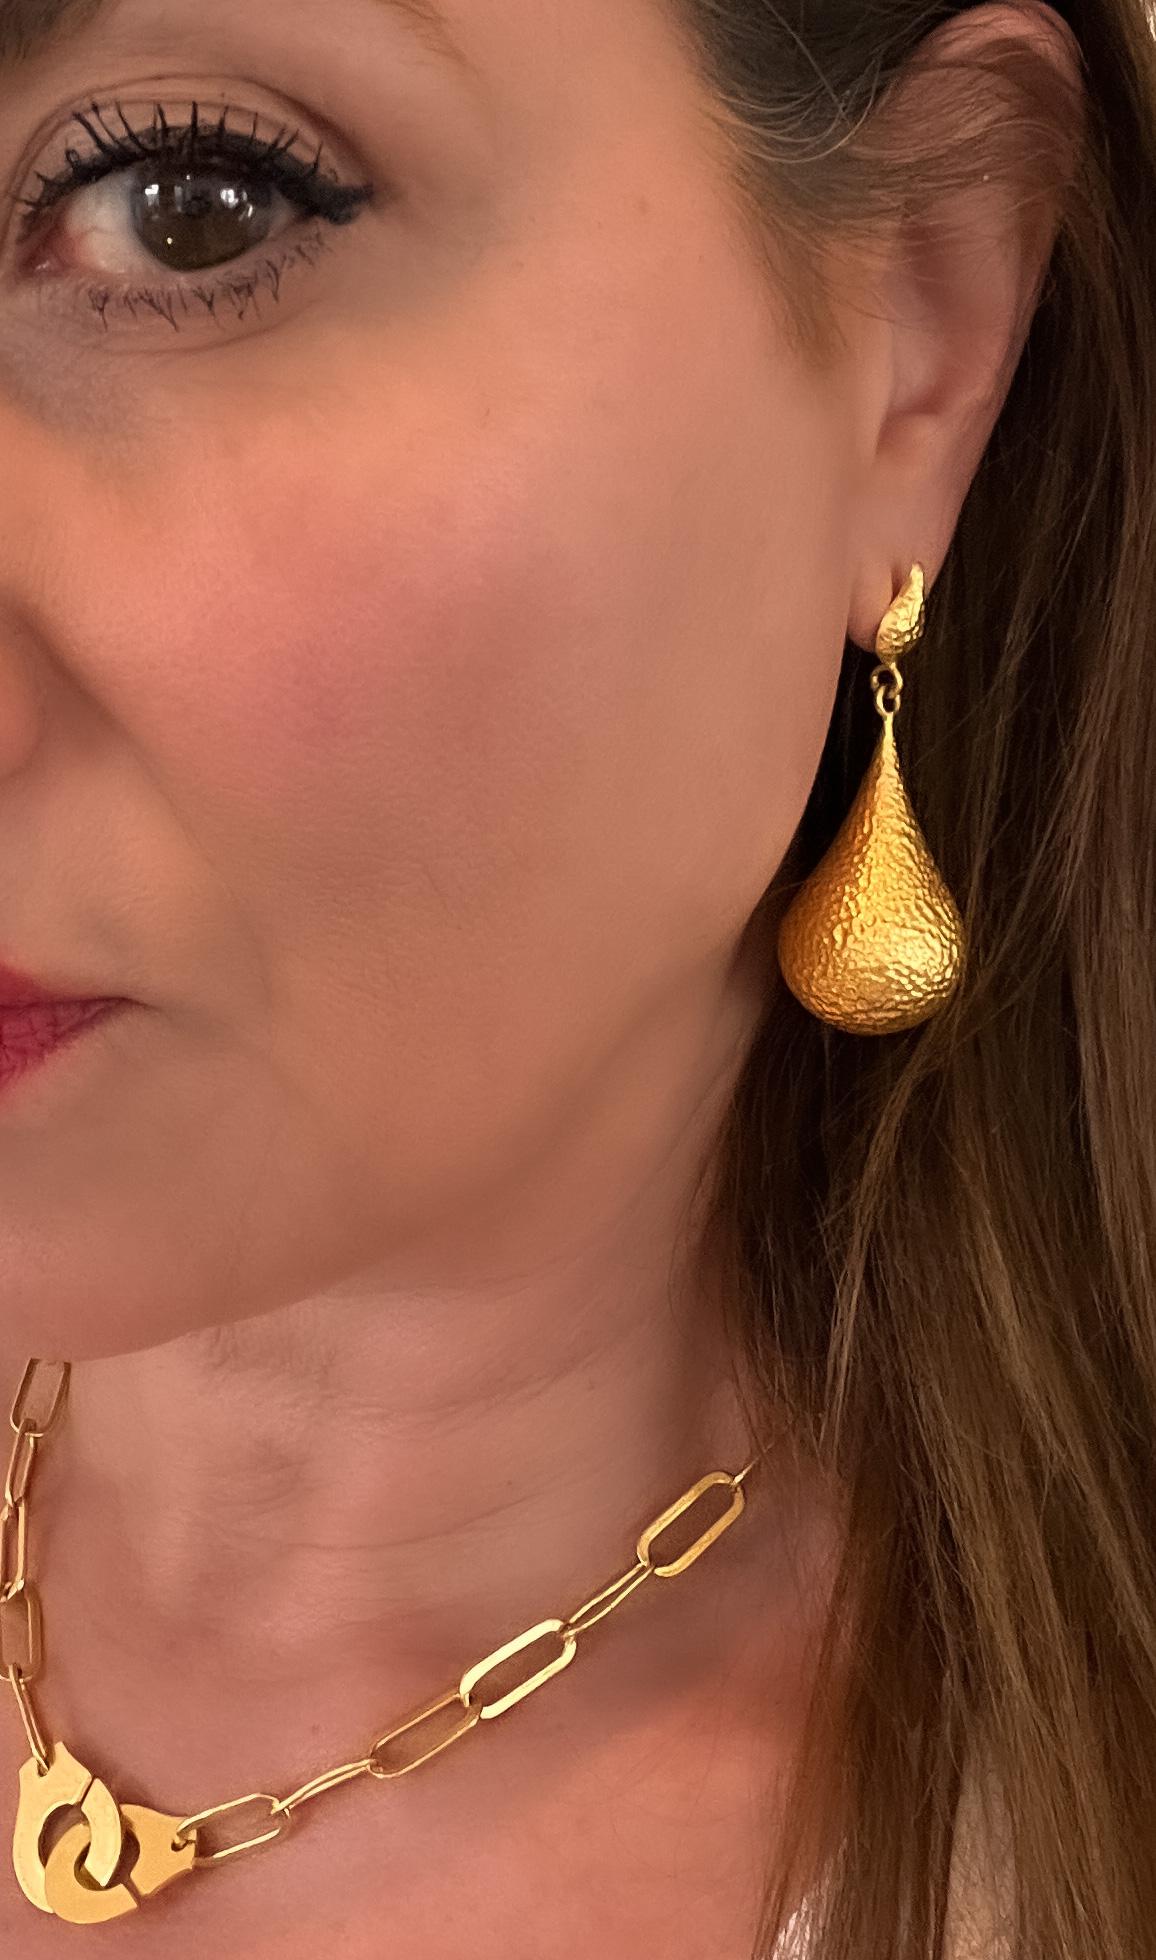 The Bali 20k Gold hand hammered, one of a kind earrings are like wearing royalty! The luxurious color of the gold complimented with the perfect amount of hammering is ideal for day or night. The vibe here is make a wish and watch the magic happen.